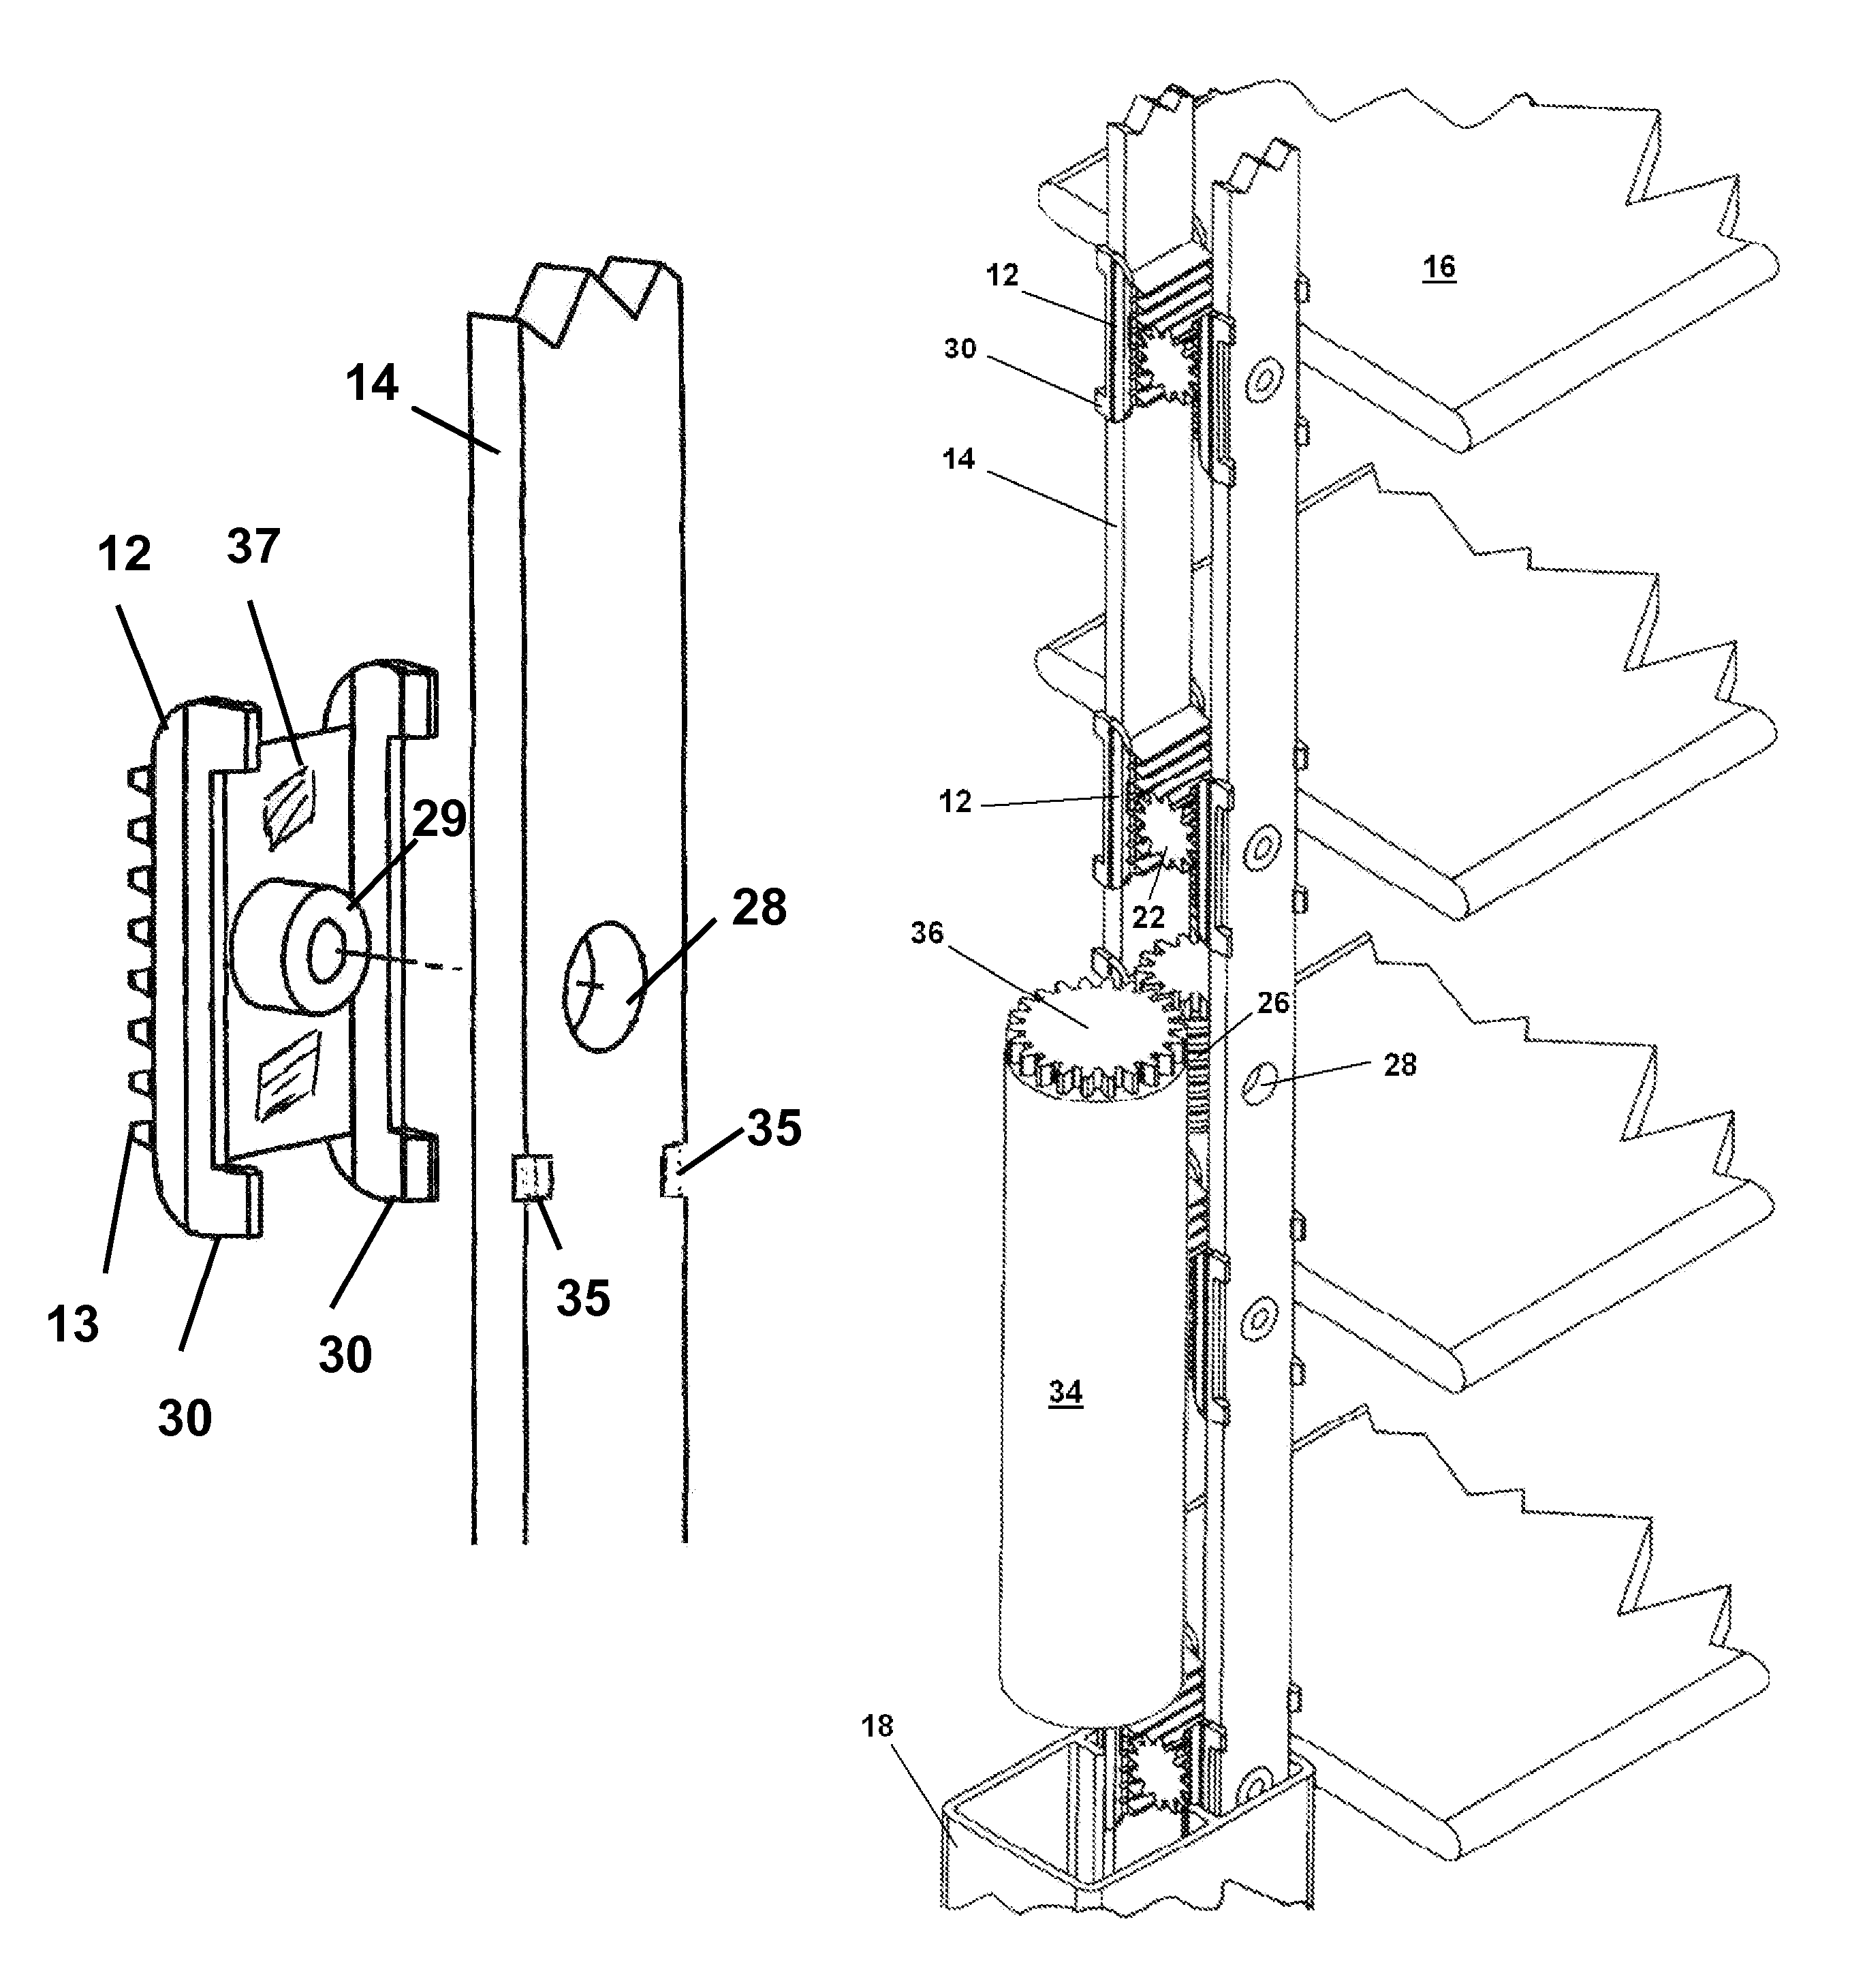 Louver rotation apparatus and method